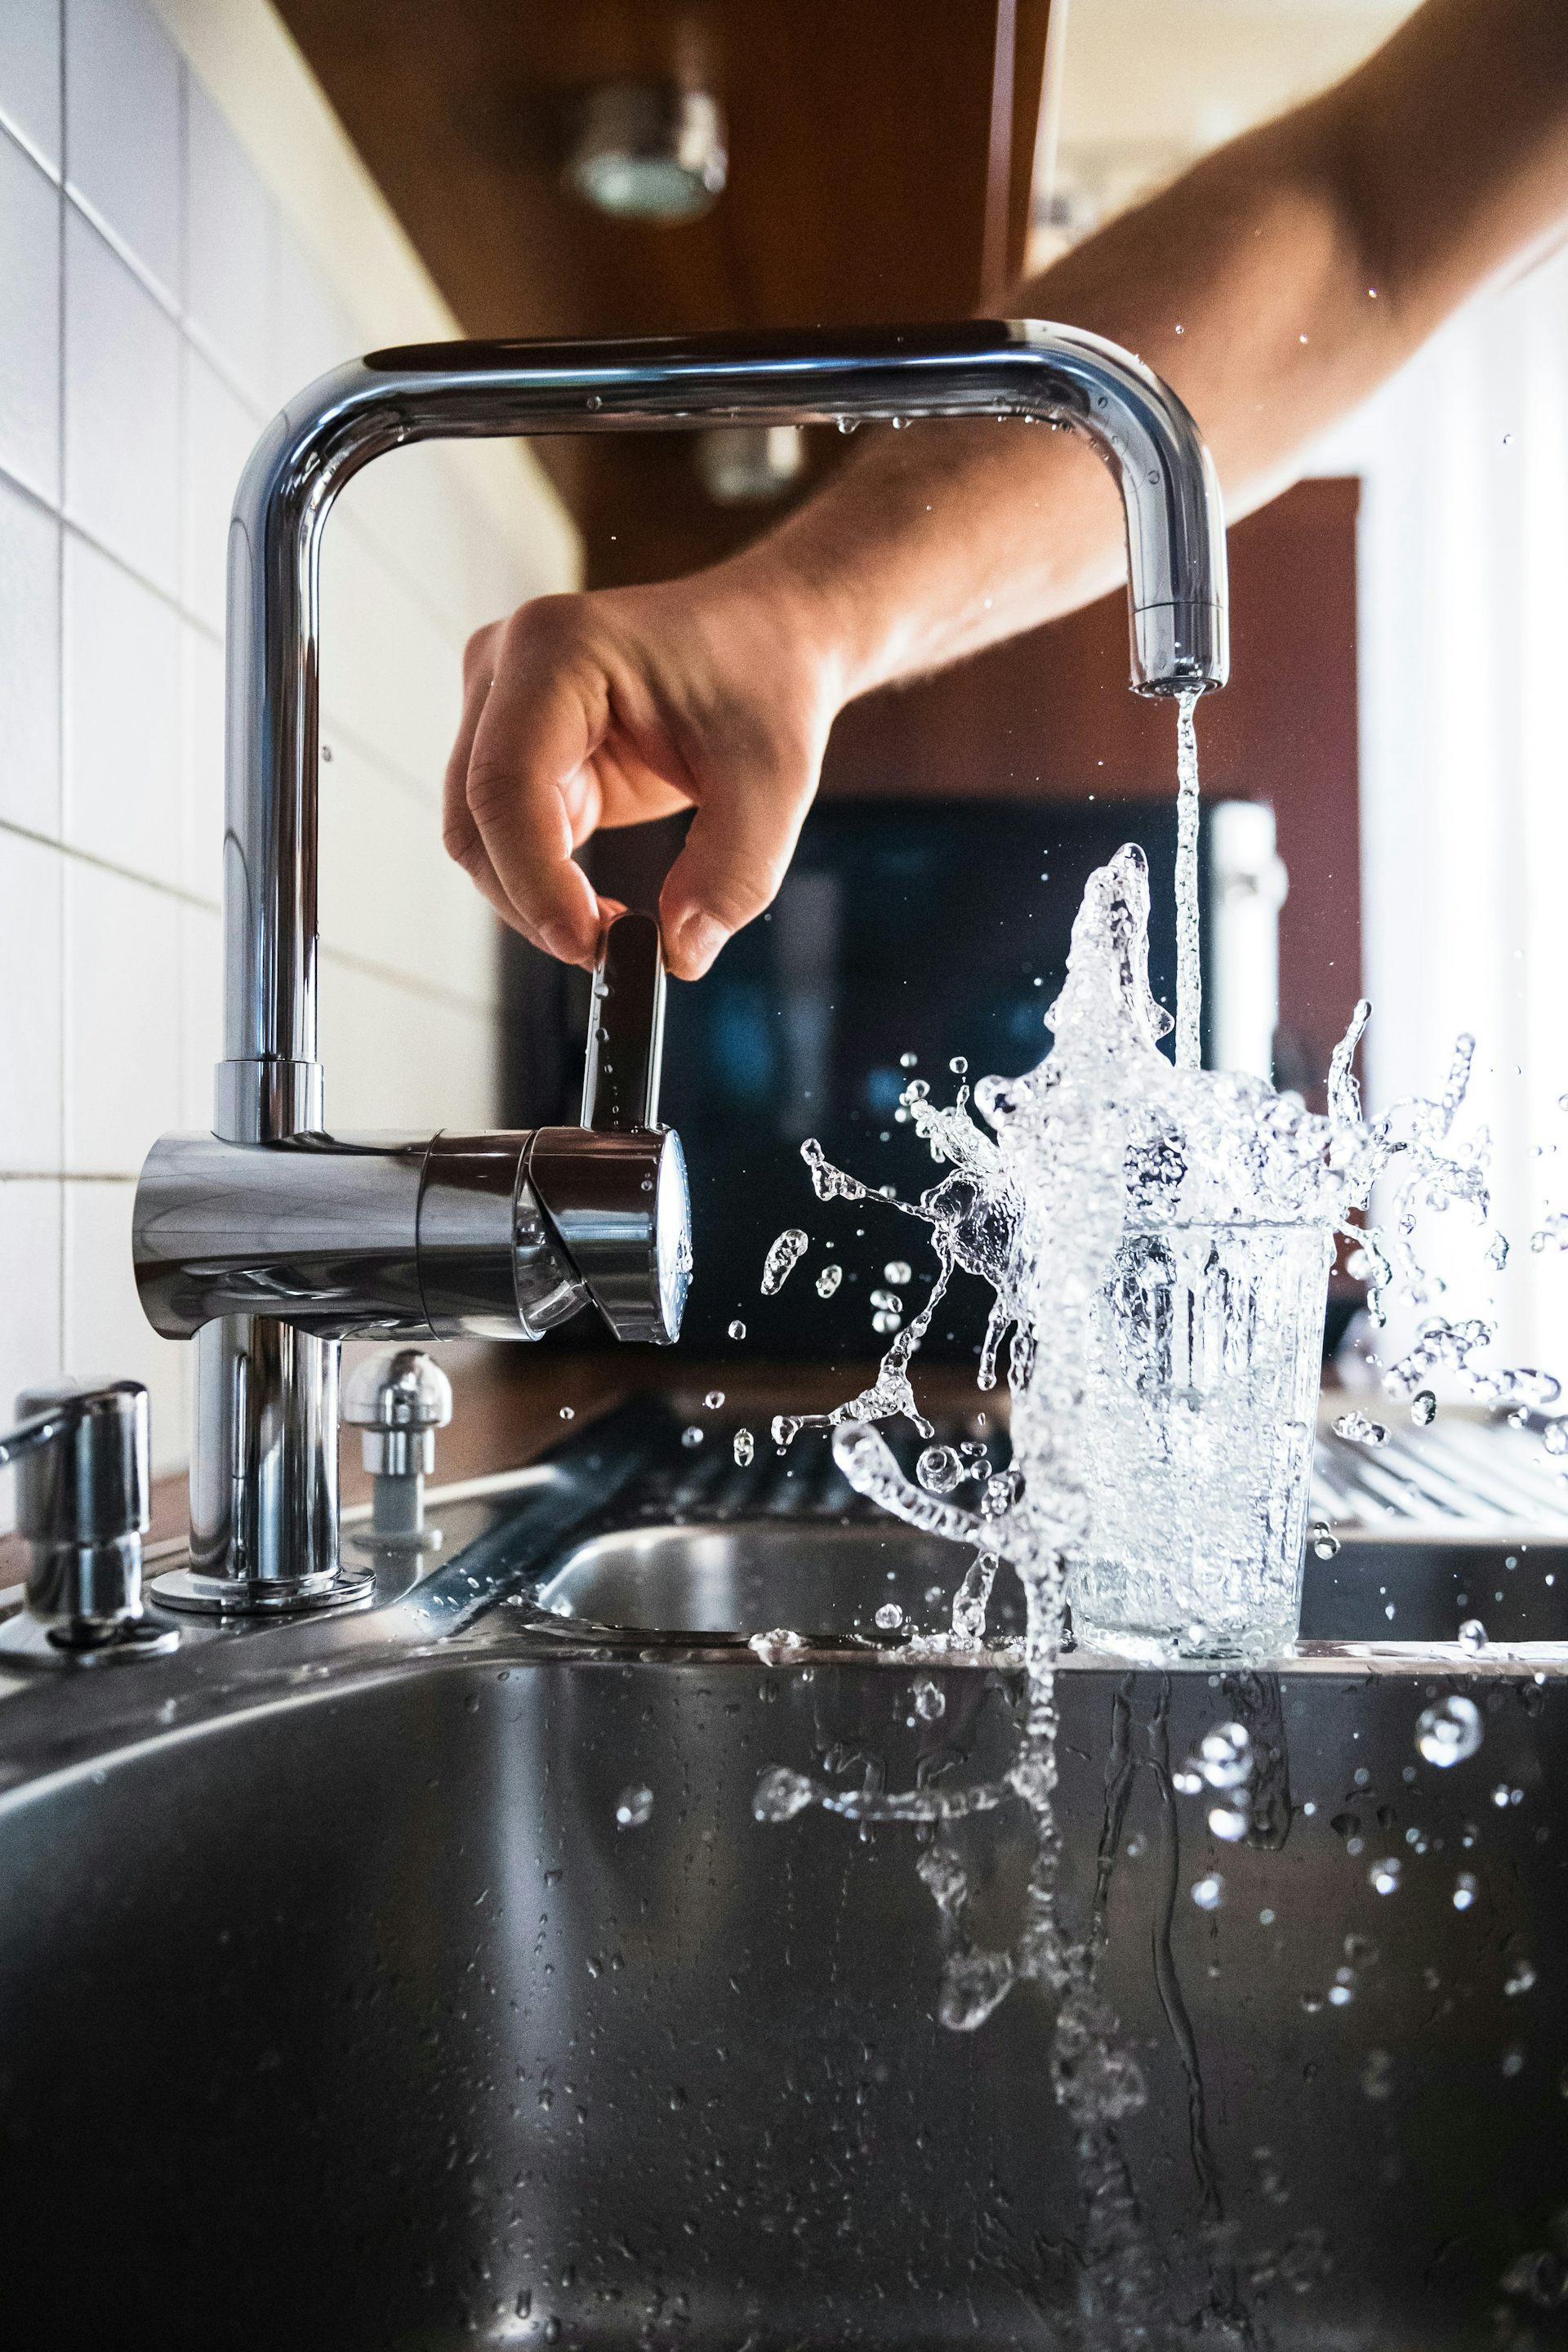 Removing PFAS from Public Water Will Cost Billions and Take Time – Here Are Ways to Filter Out Some Harmful ‘Forever Chemicals’ at Home